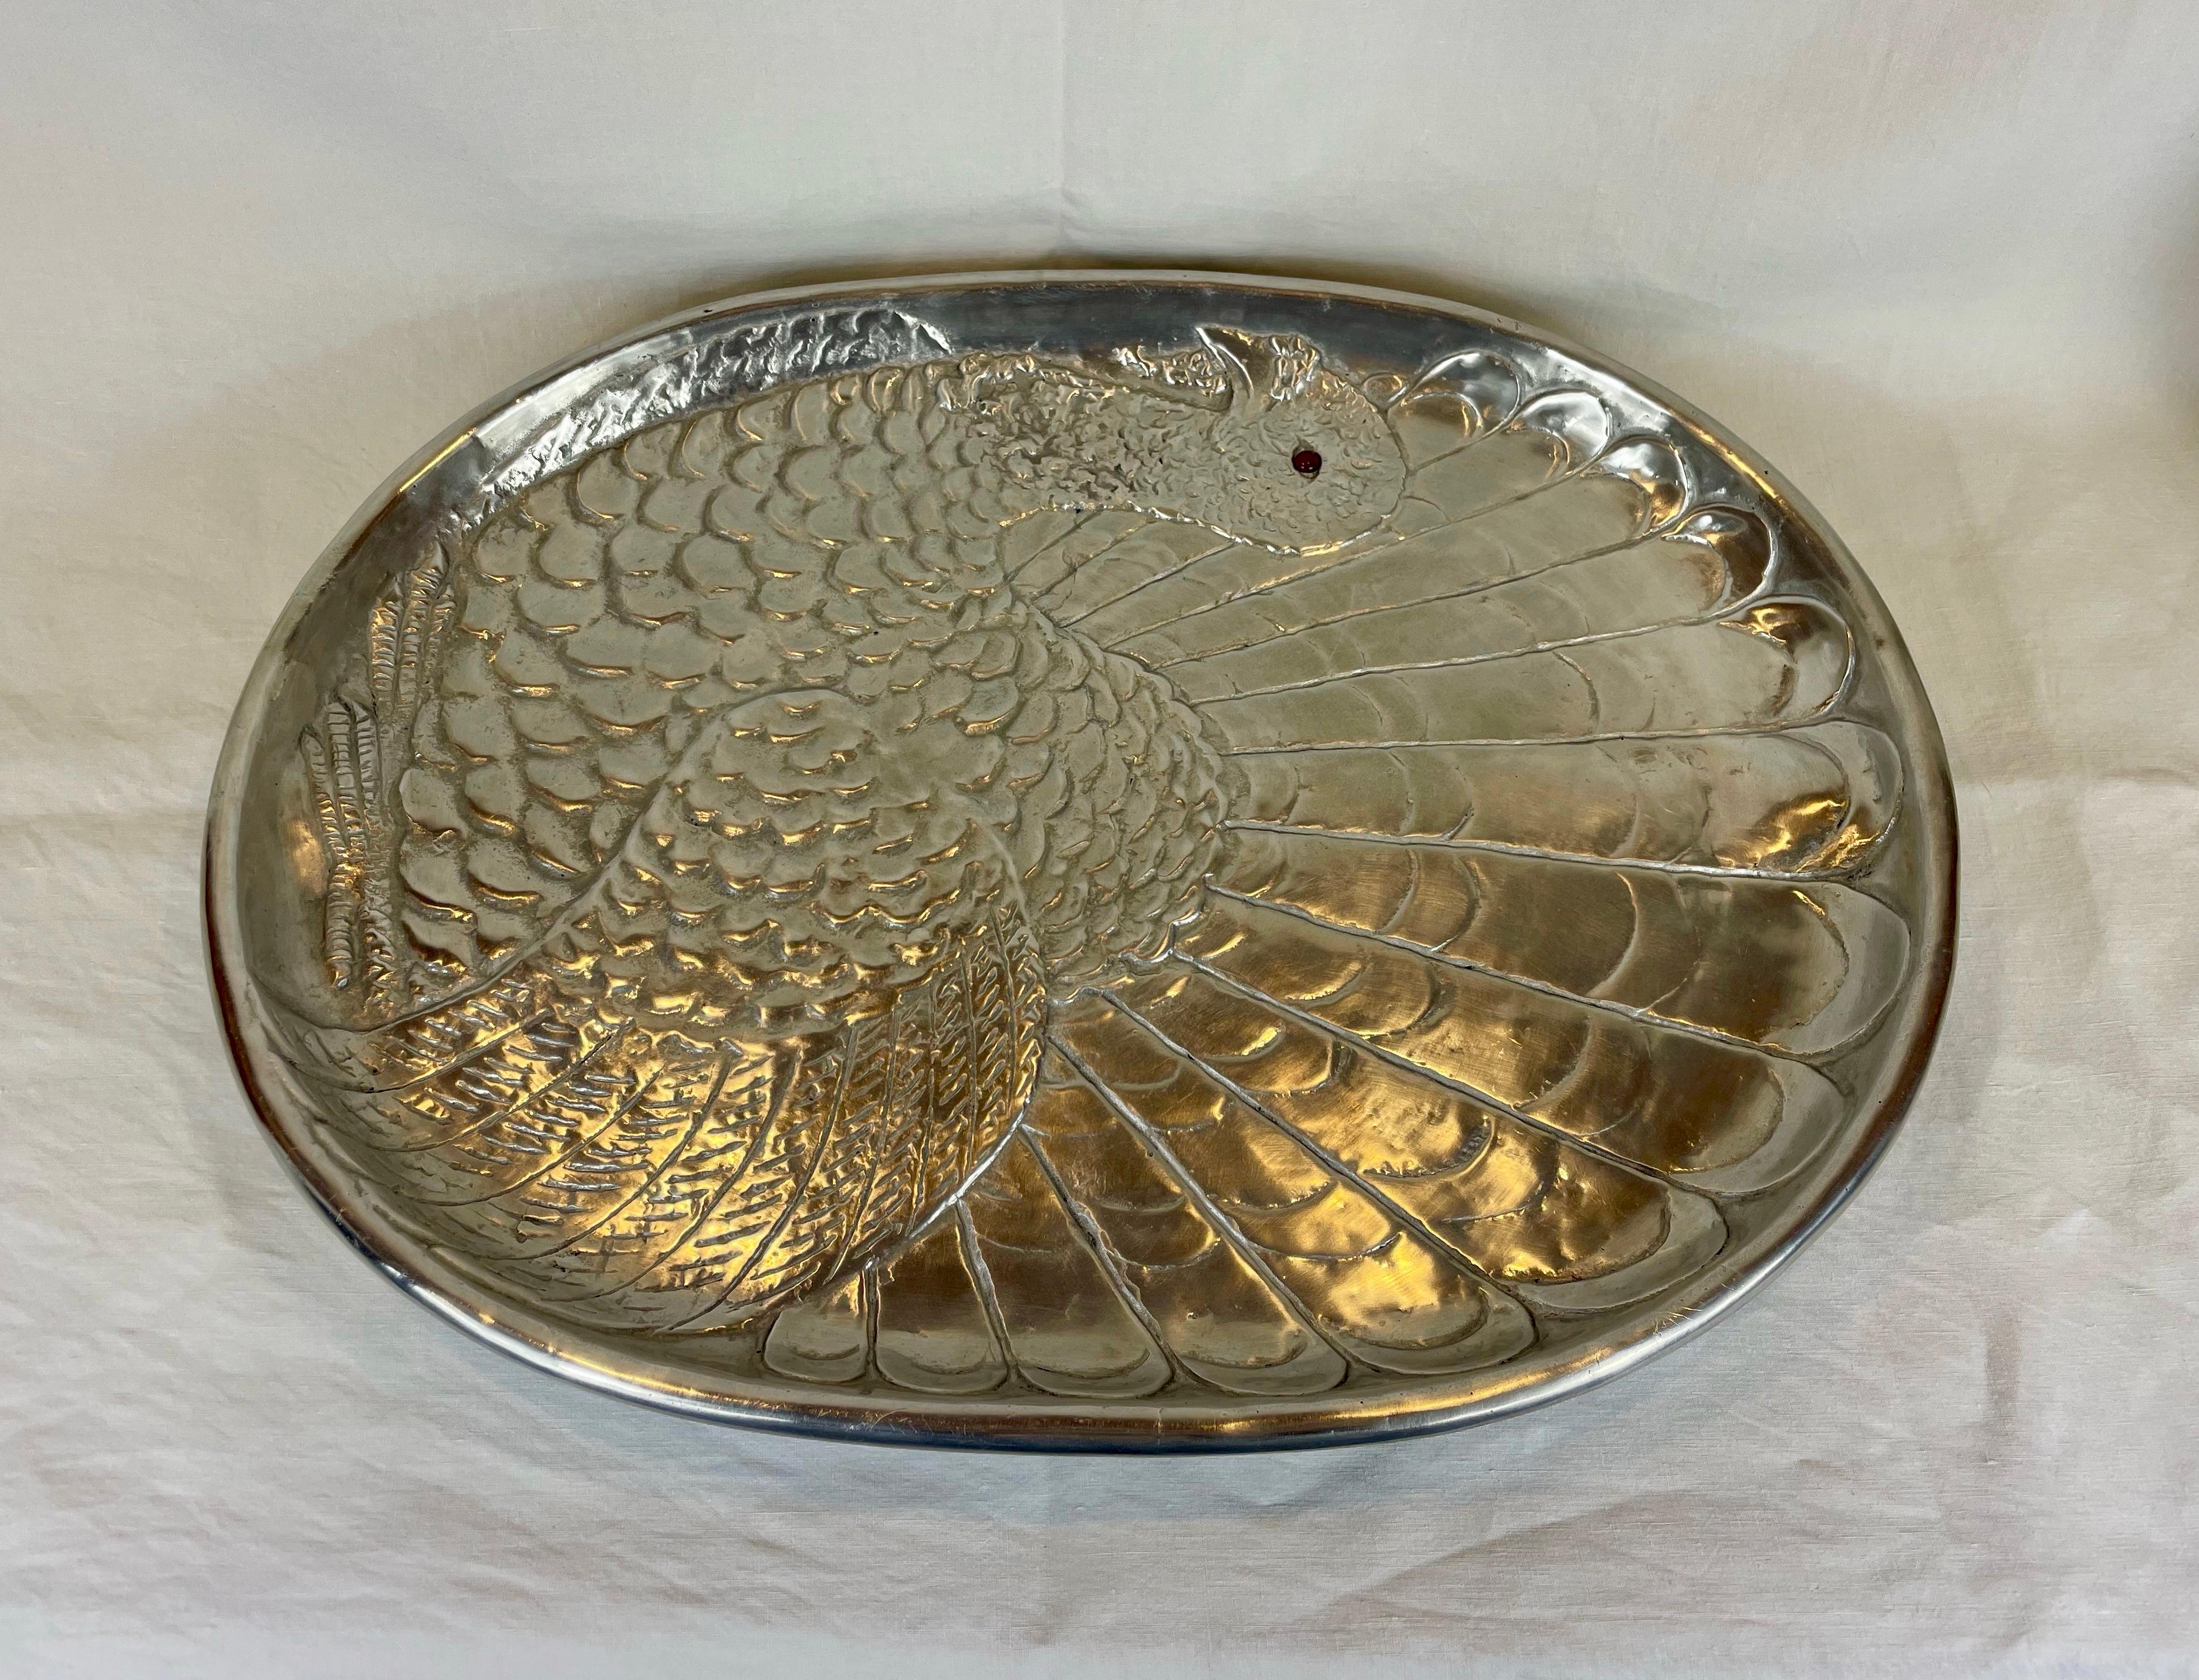 Large polished aluminium serving platter by Arthur Court.
This striking platter is entirely decorated with a wonderful turkey design and has a red carnelian eye.
Supported on 4 sculpted turkey feet and signed Arthur Court 1987.